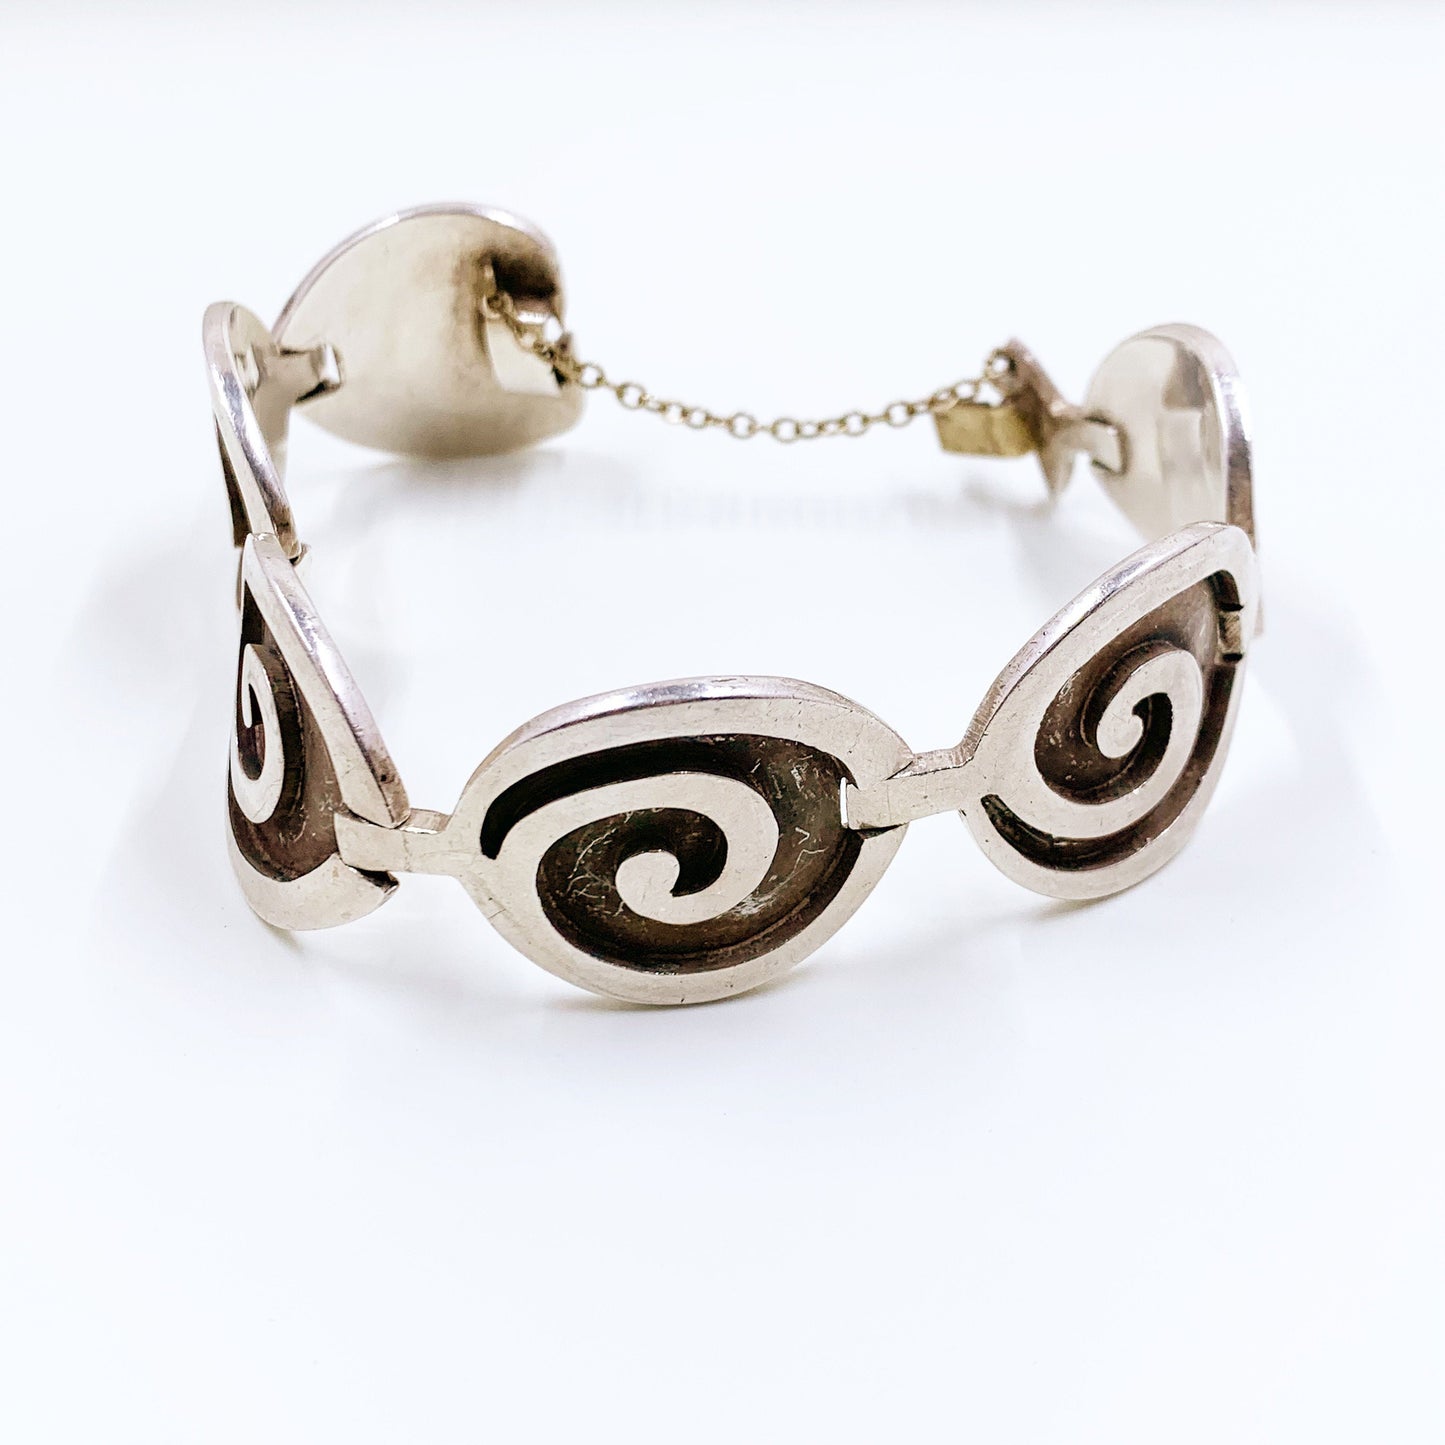 Vintage Silver Mexican Modernist Panel Bracelet | Mexican Modernist Overlay Swirl Link Bracelet